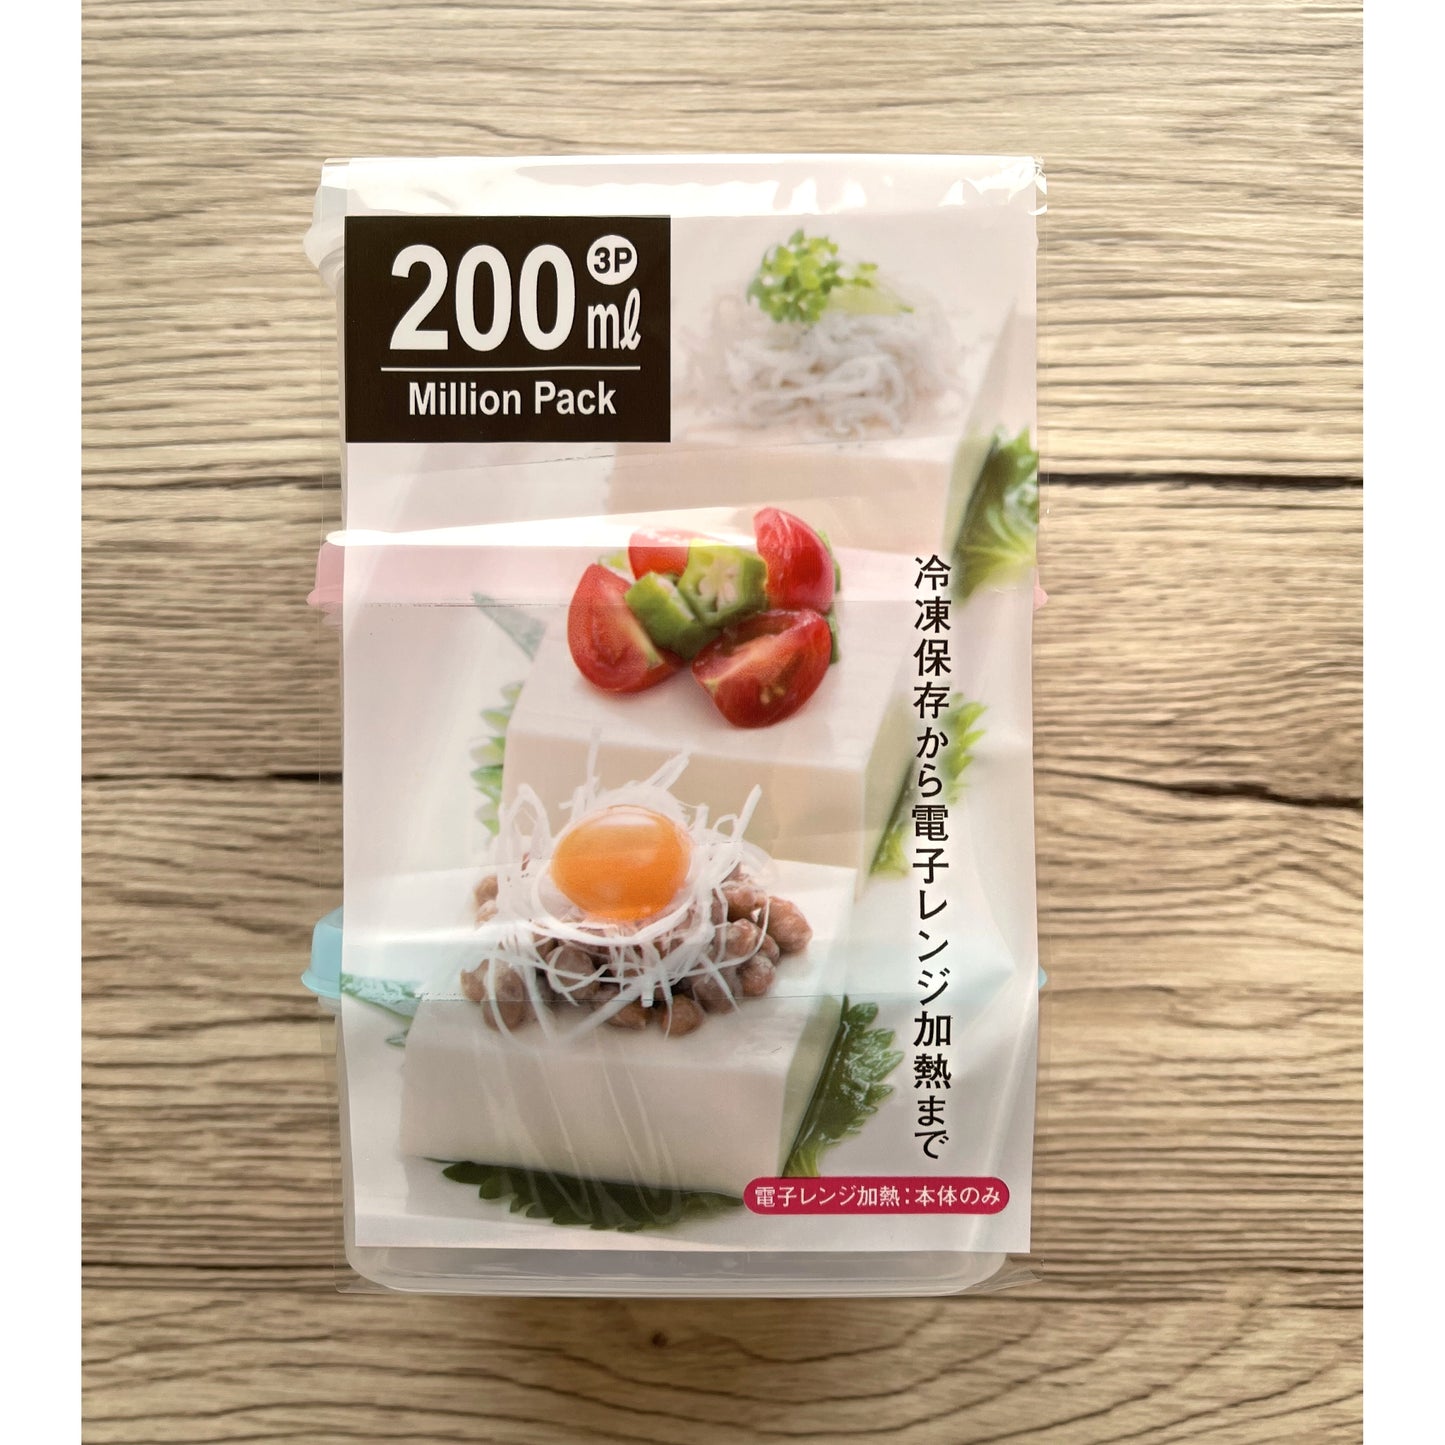 Storage Containers 200ml x 3 (Made in Japan)